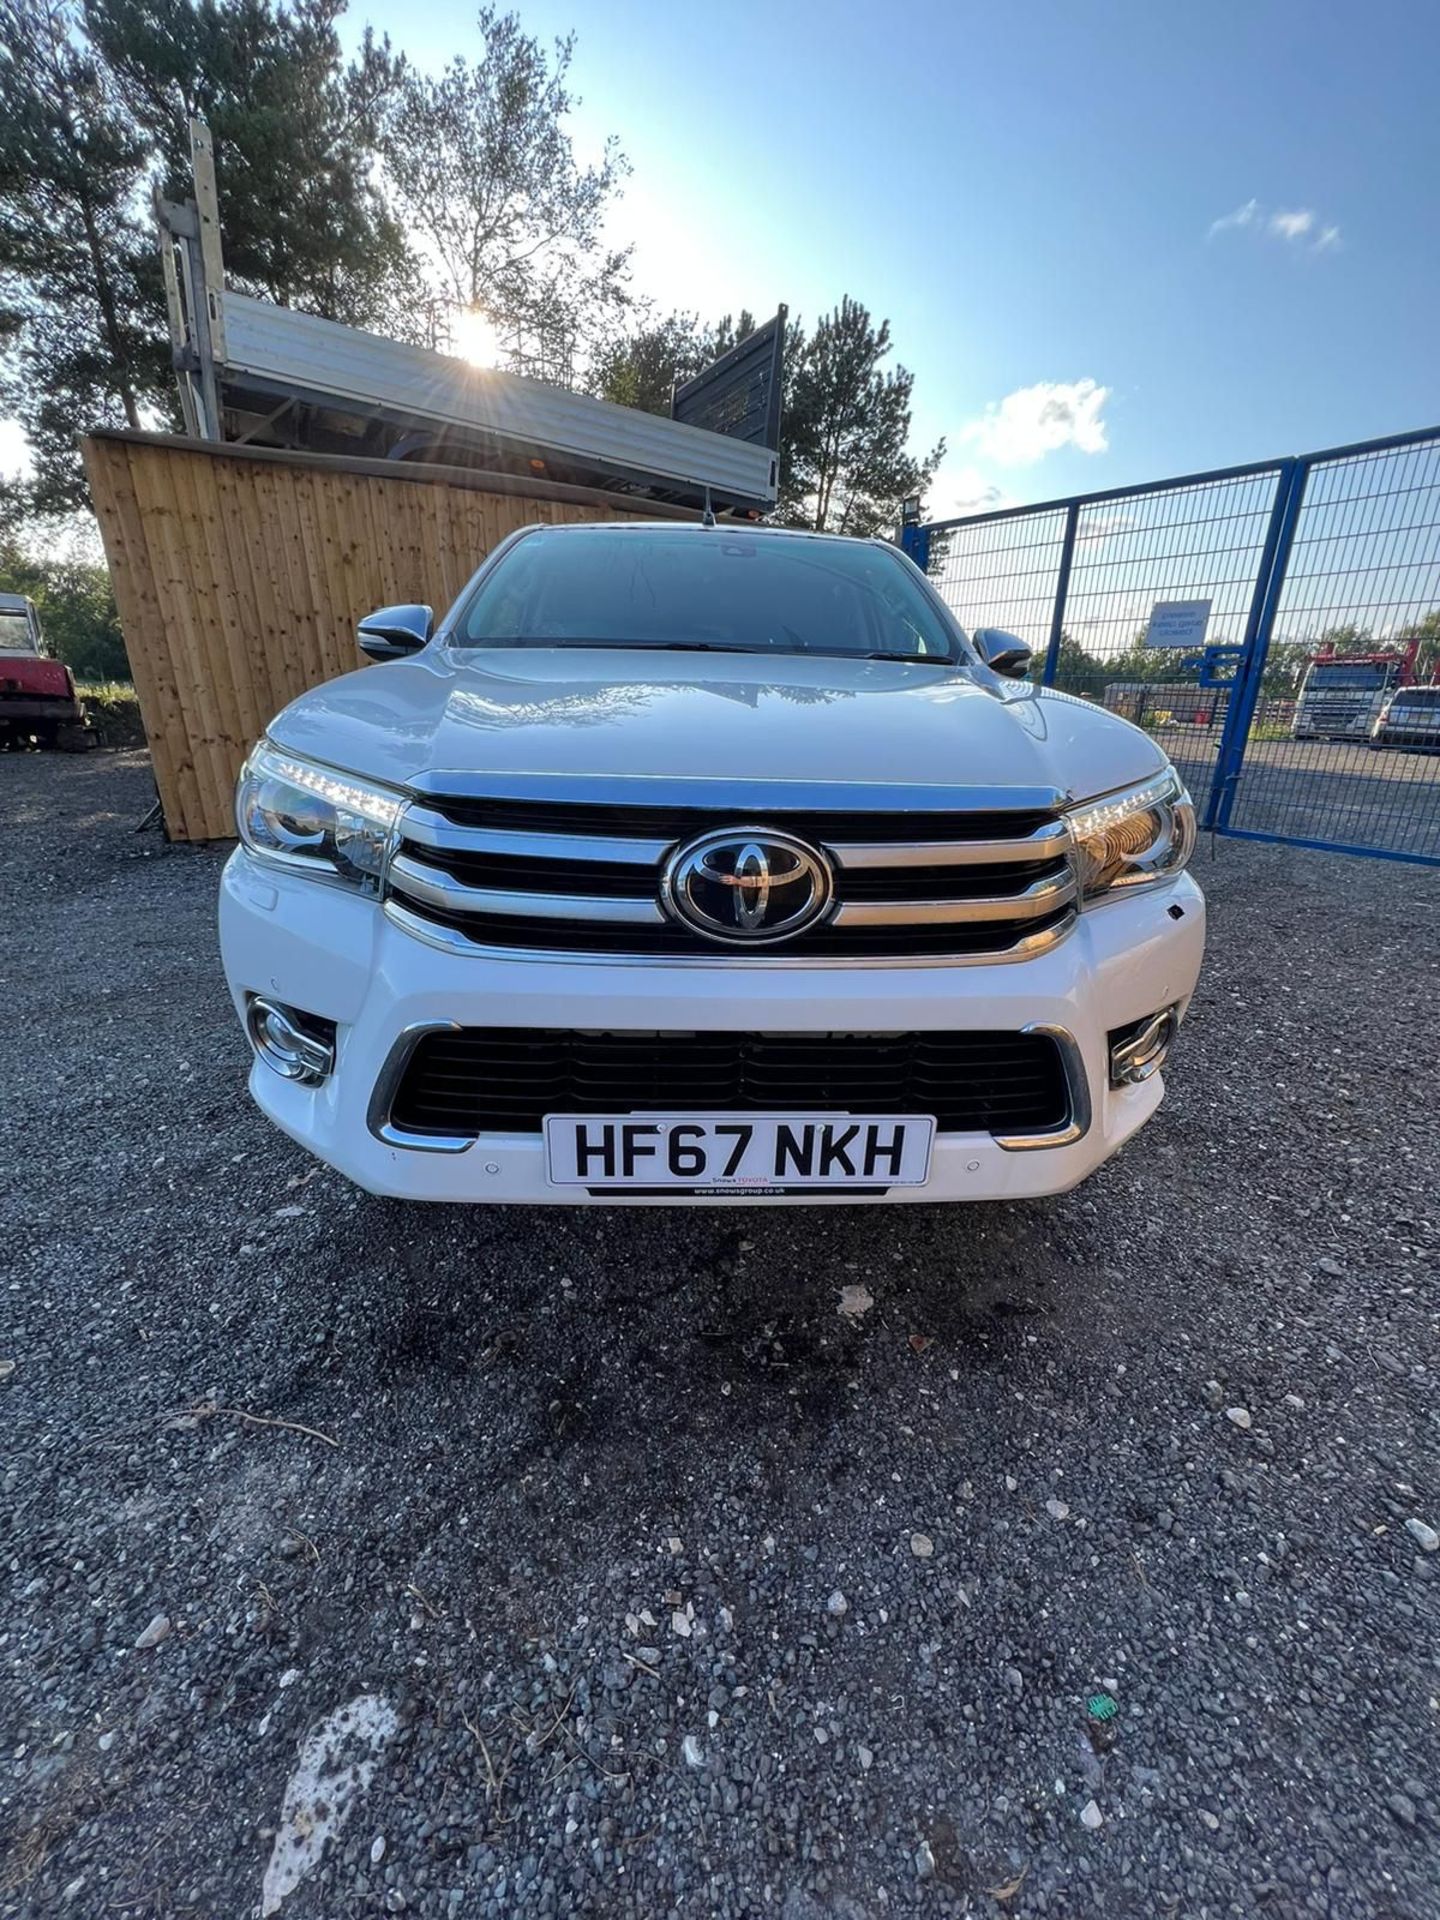 TOYOTA HILUX INVINCIBLE X DOUBLE CAB PICKUP TRUCK 67 REG - Image 13 of 14